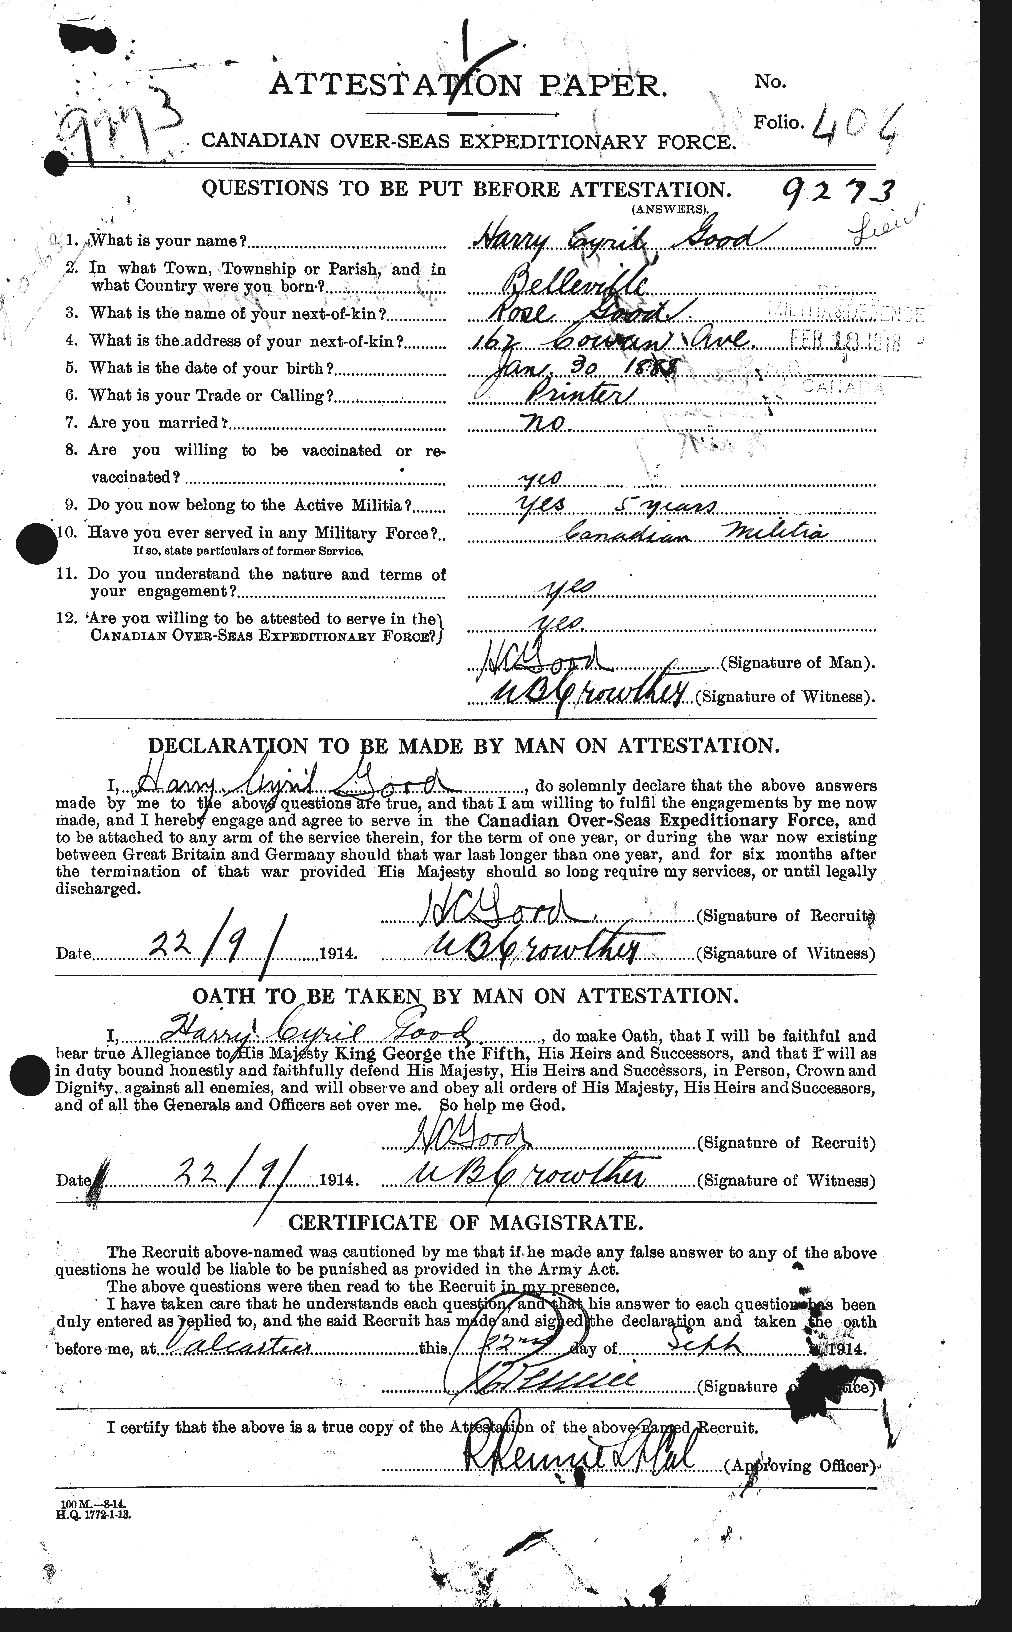 Personnel Records of the First World War - CEF 354960a